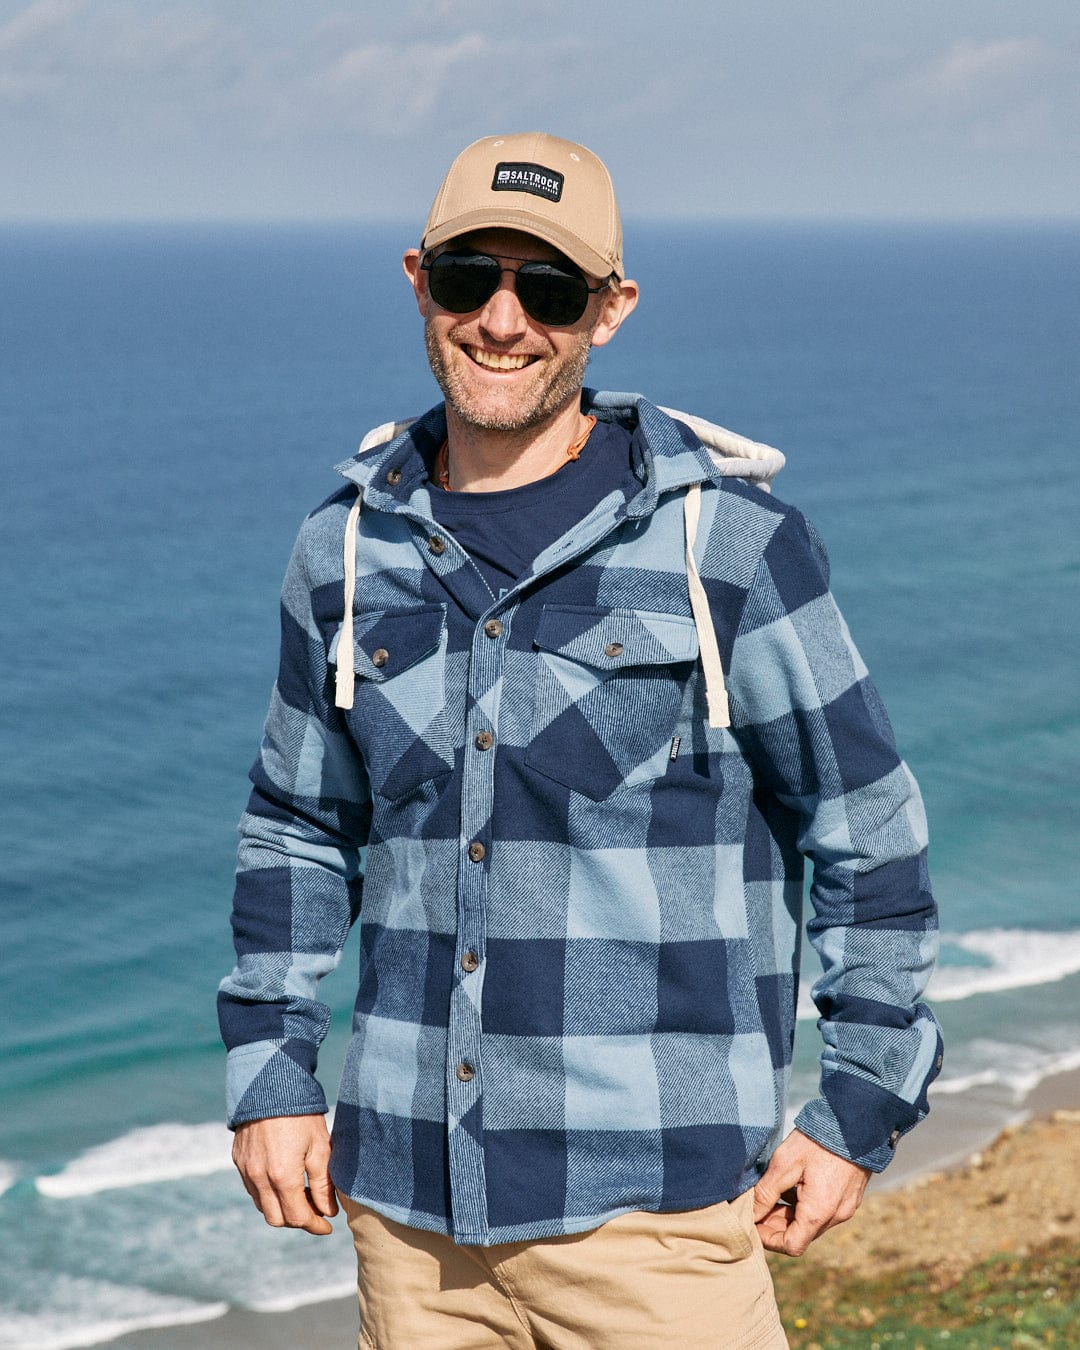 Man in sunglasses and a cap, wearing a Saltrock Beale - Mens Hooded Long Sleeve Shirt in Blue with a detachable hood, smiling by the seaside.